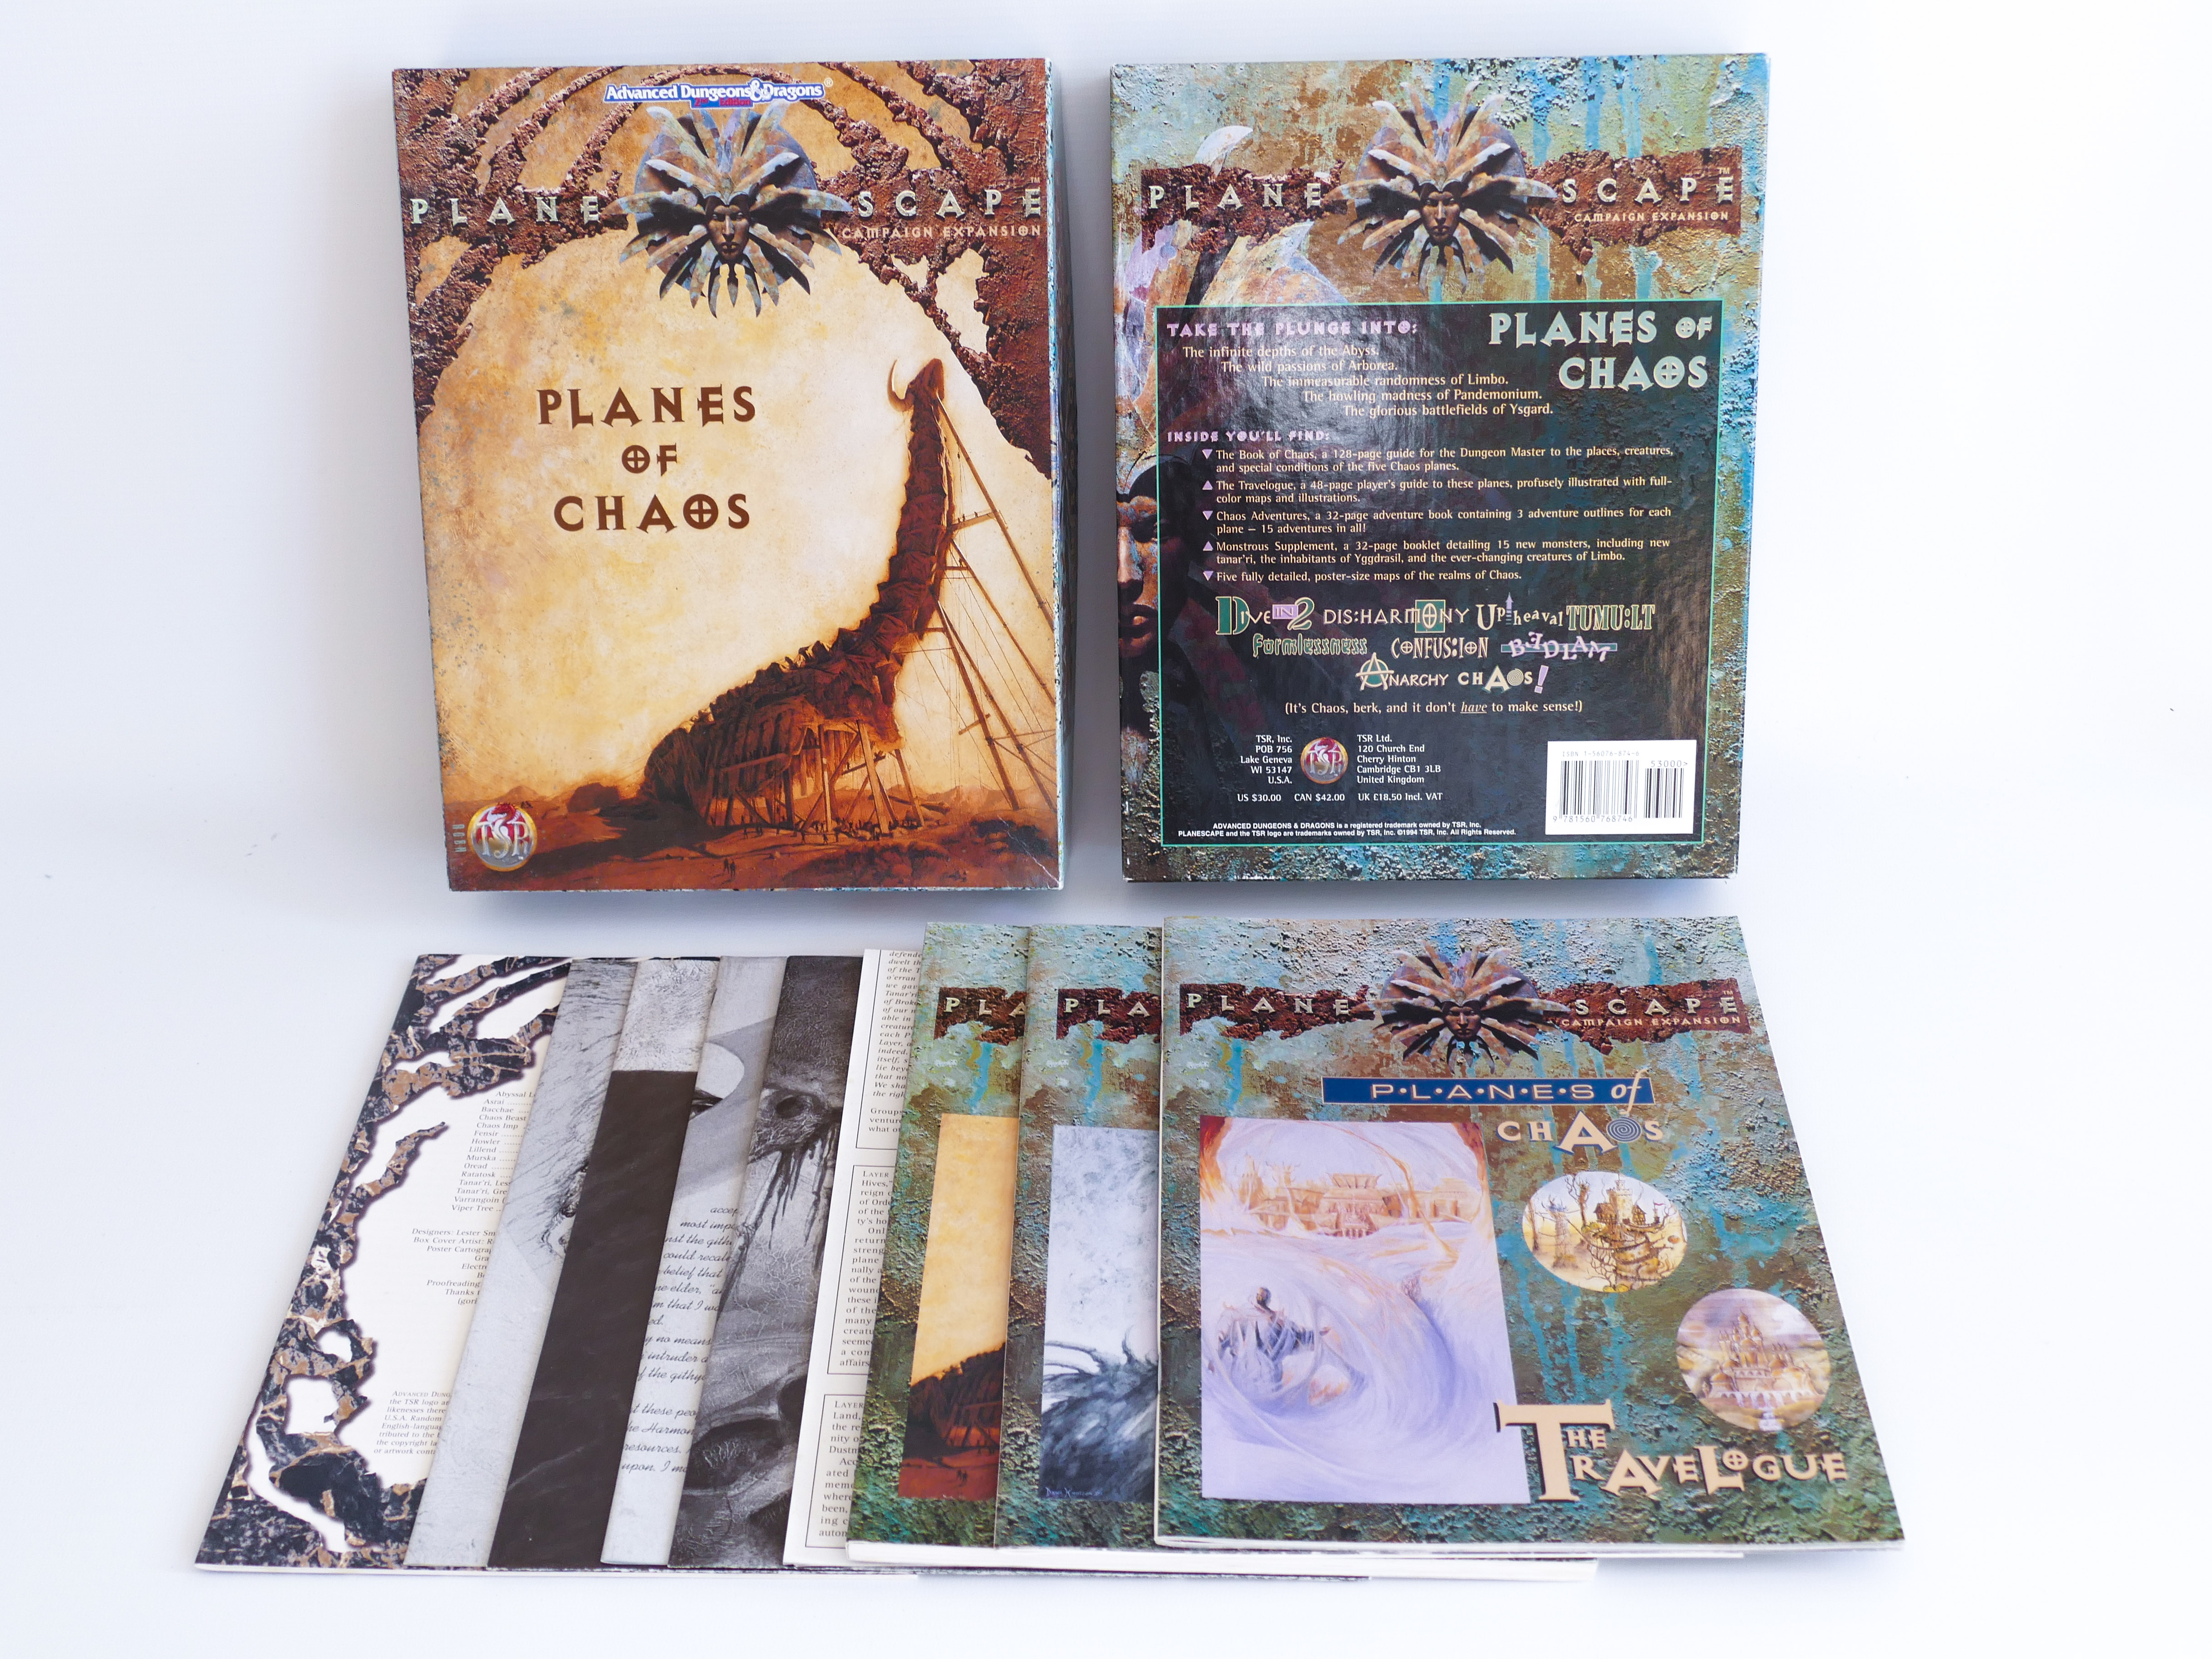 PLANESCAPE LOT D PLANES OF CHAOS FANTASY RPG ROLE PLAYING GAME ADVANCED DUNGEONS & DRAGONS AD&D D&D